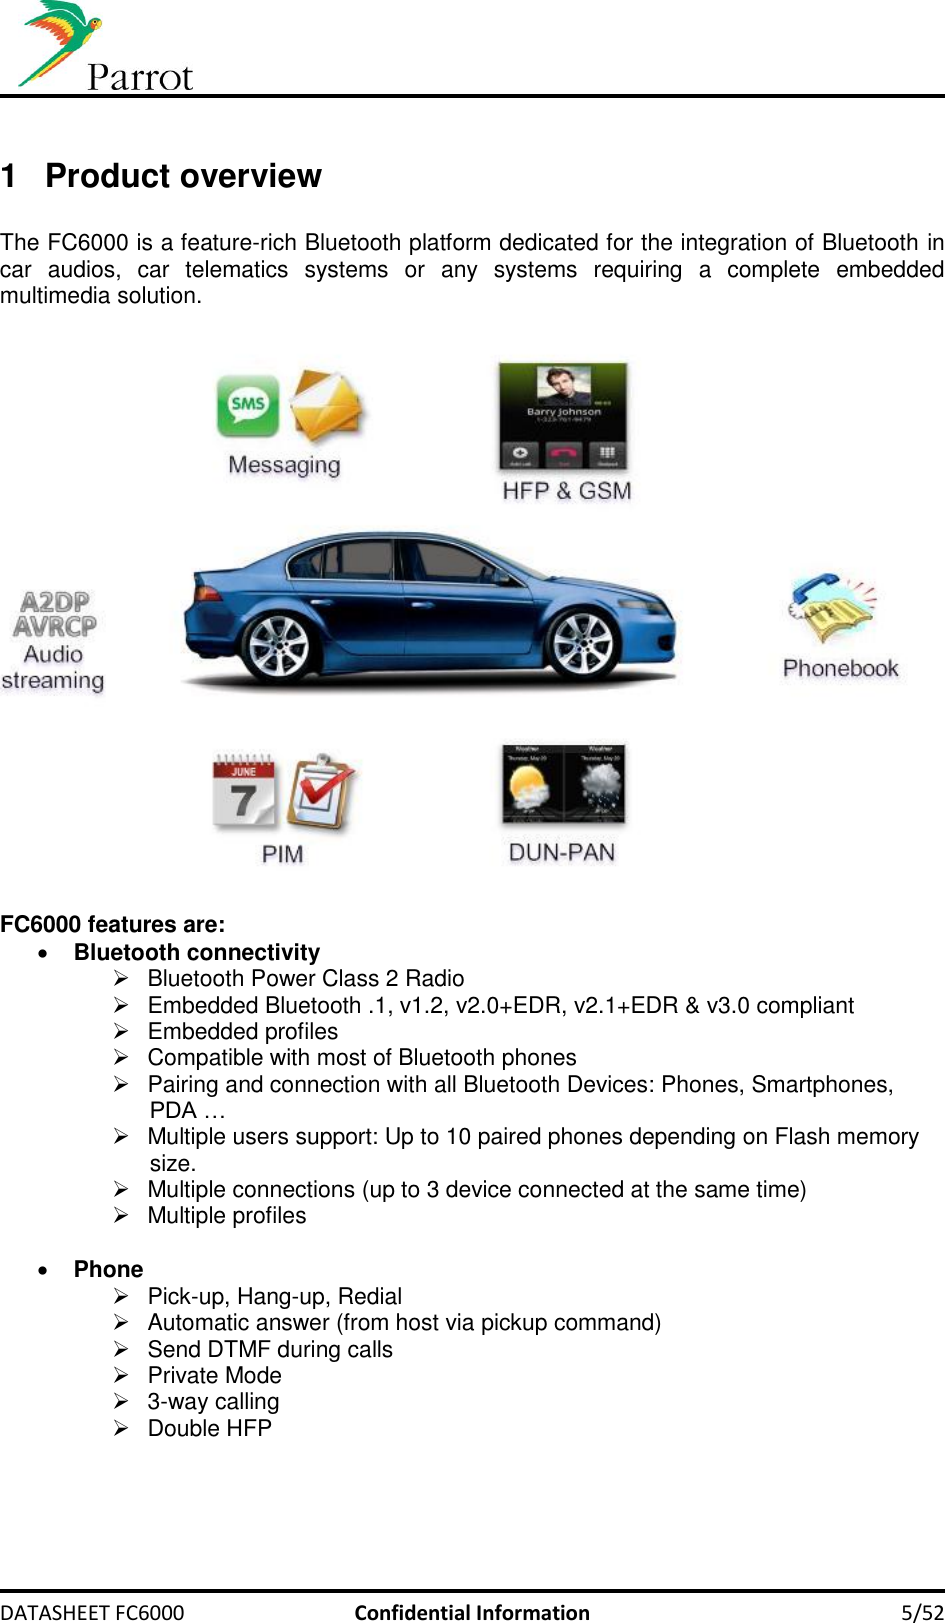     DATASHEET FC6000  Confidential Information  5/52  1  Product overview  The FC6000 is a feature-rich Bluetooth platform dedicated for the integration of Bluetooth in car  audios,  car  telematics  systems  or  any  systems  requiring  a  complete  embedded multimedia solution.     FC6000 features are:  Bluetooth connectivity   Bluetooth Power Class 2 Radio   Embedded Bluetooth .1, v1.2, v2.0+EDR, v2.1+EDR &amp; v3.0 compliant   Embedded profiles   Compatible with most of Bluetooth phones   Pairing and connection with all Bluetooth Devices: Phones, Smartphones, PDA …   Multiple users support: Up to 10 paired phones depending on Flash memory size.   Multiple connections (up to 3 device connected at the same time)   Multiple profiles    Phone   Pick-up, Hang-up, Redial   Automatic answer (from host via pickup command)   Send DTMF during calls   Private Mode   3-way calling   Double HFP 